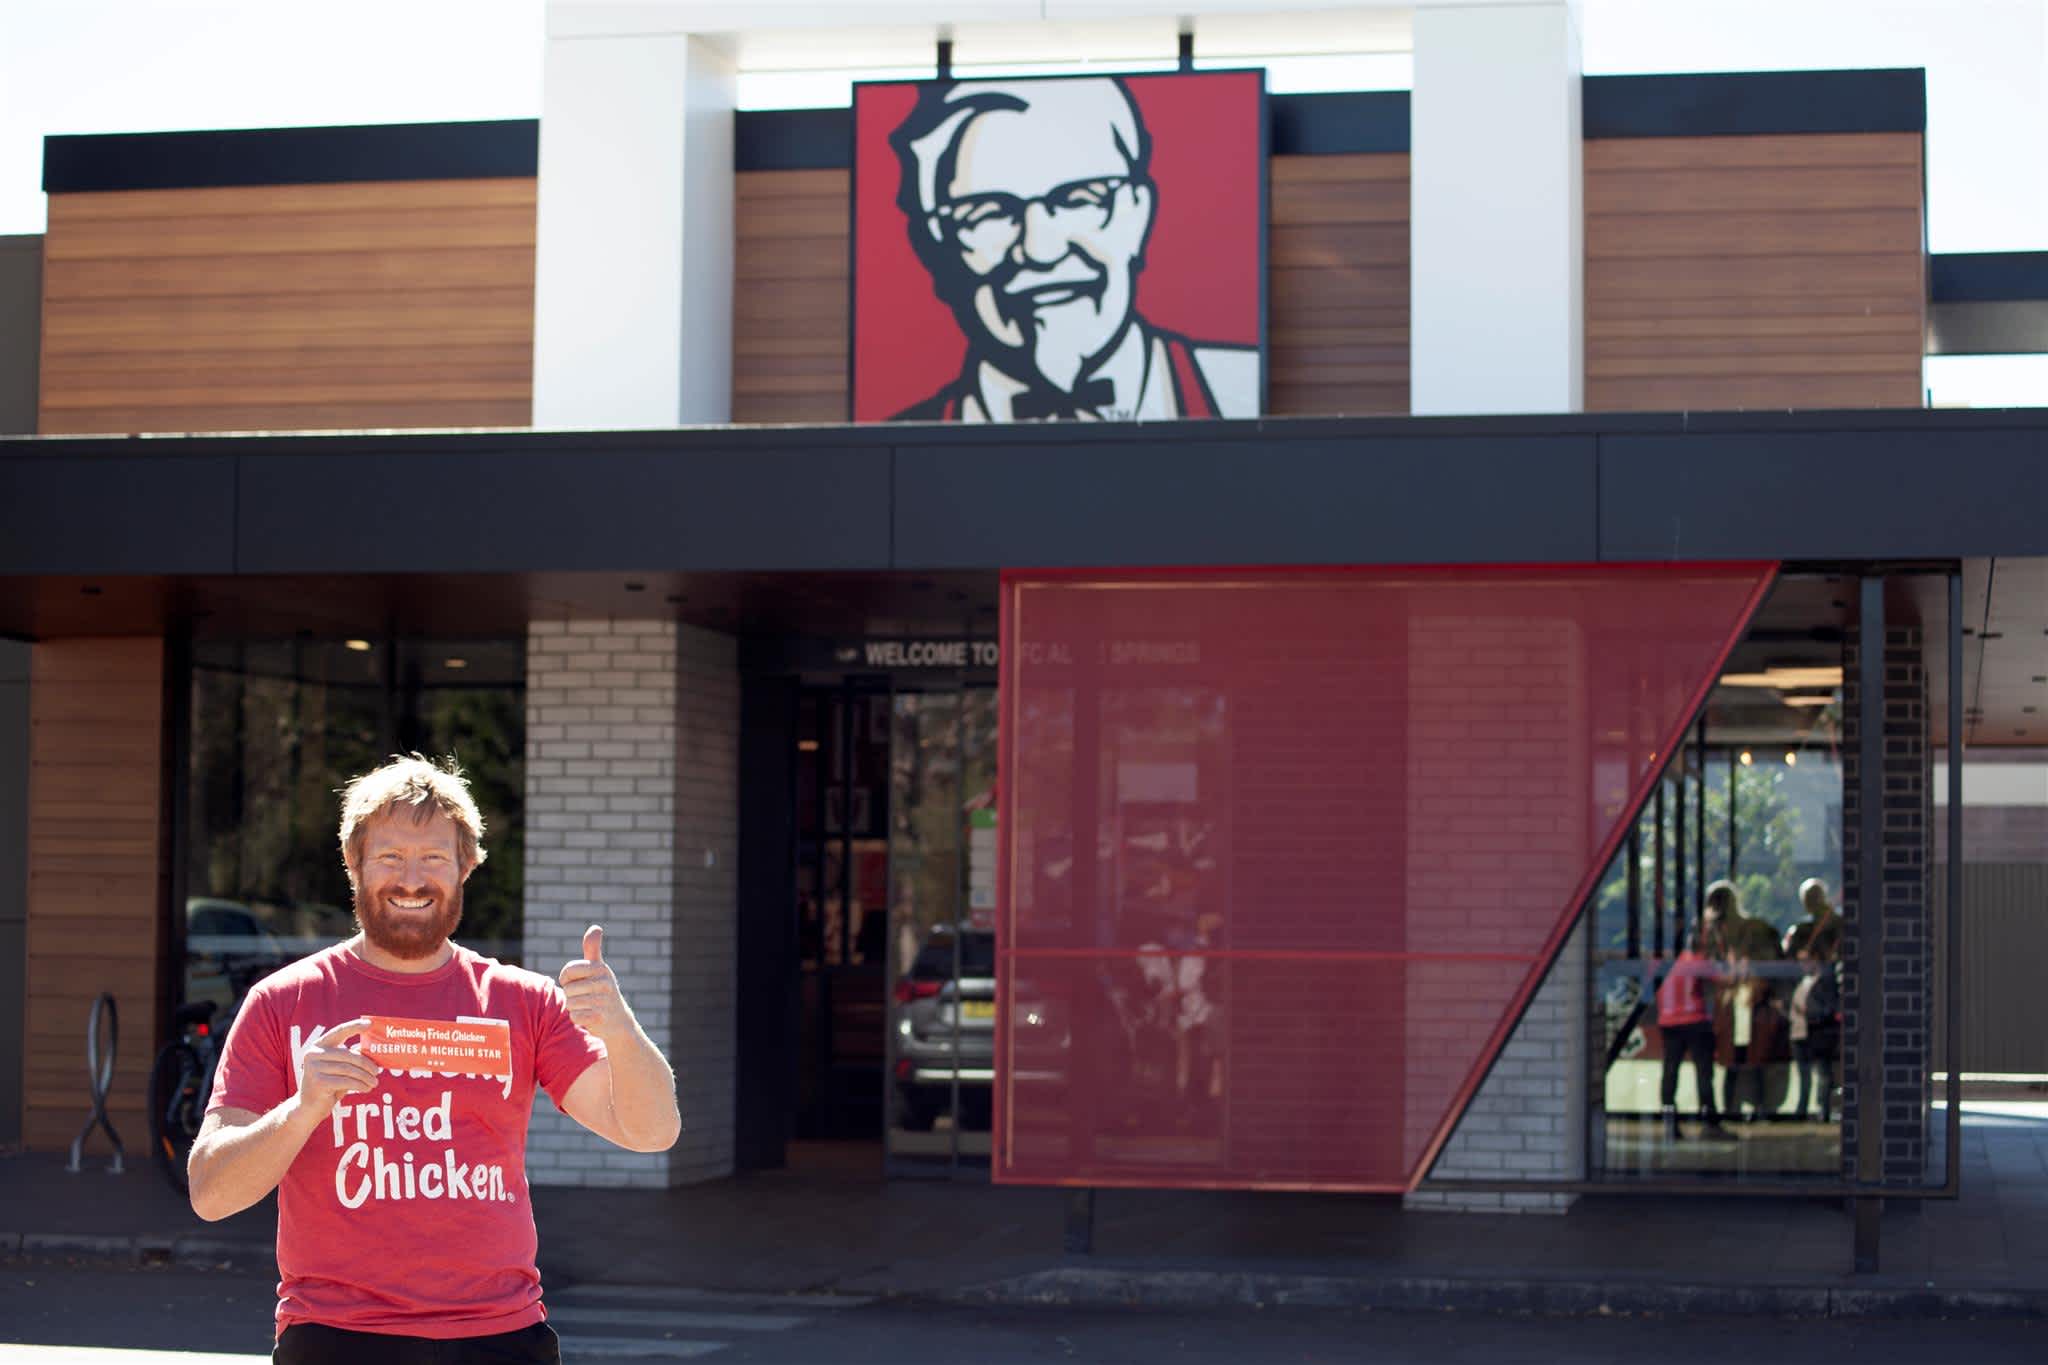 MICHELIN IMPOSSIBLE: ONE MAN’S EPIC QUEST TO BE GRANTED A MICHELIN STAR FOR HIS KENTUCKY FRIED CHICKEN